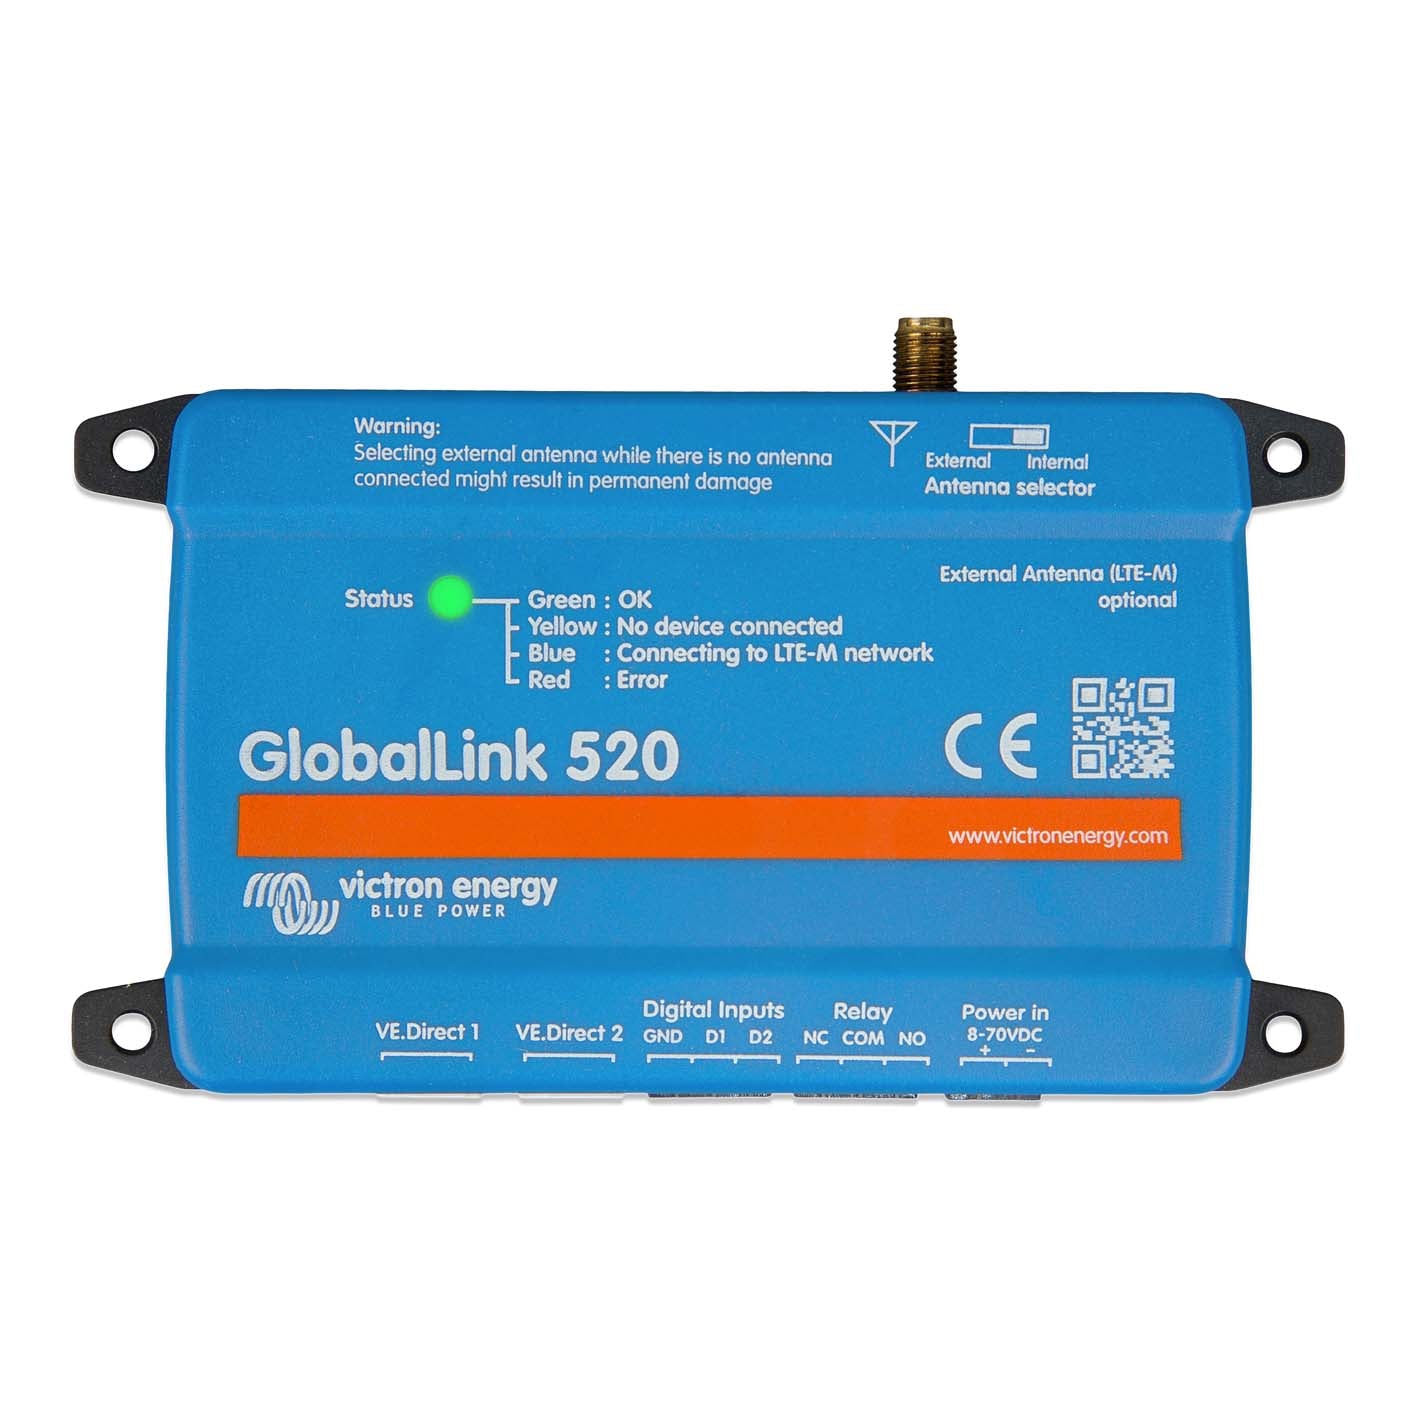 GLOBALLINK520 (INCL. 5 YEAR ACTIVATED SIMCARD)